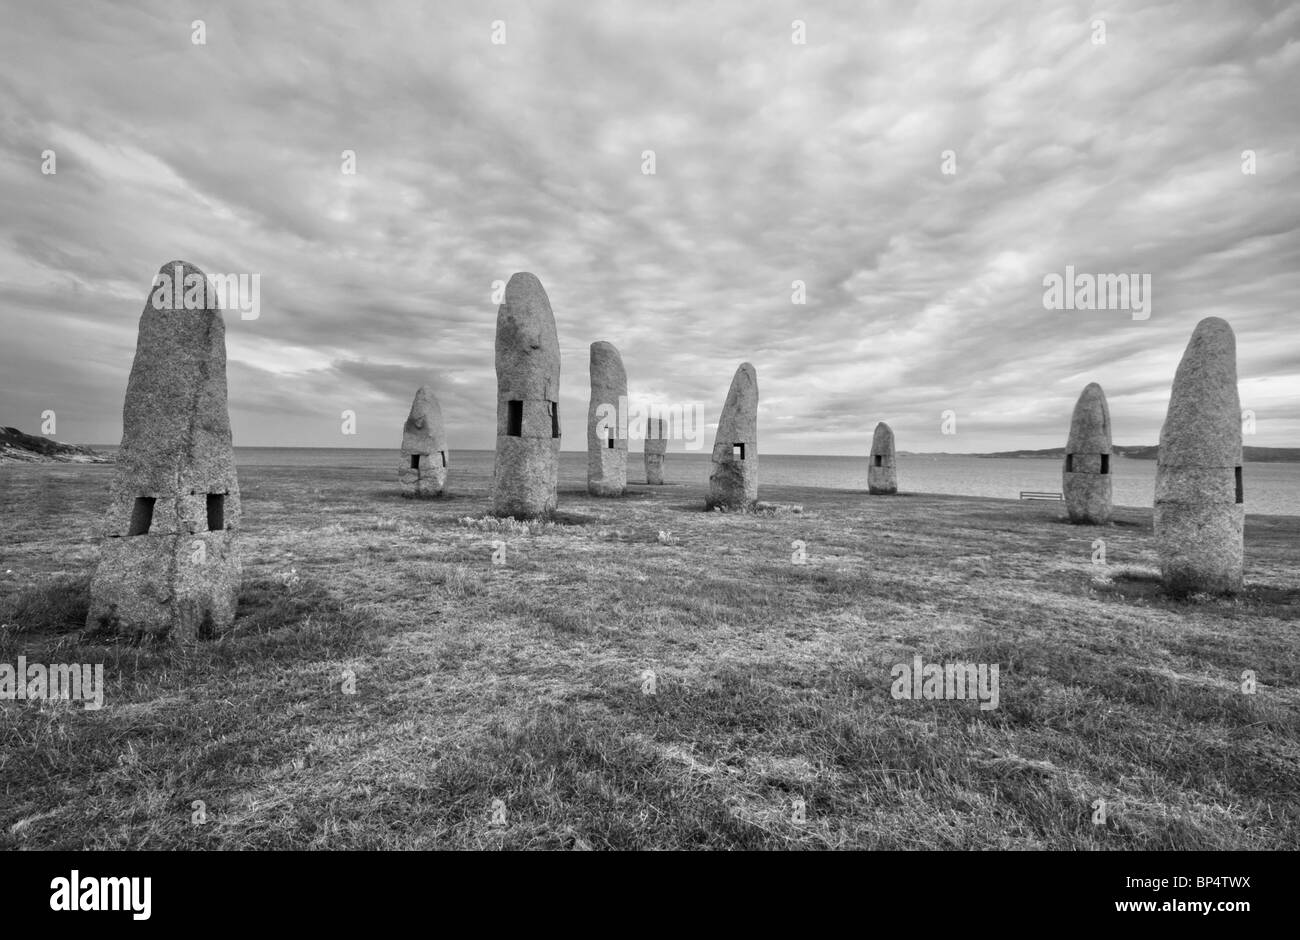 Menhirs for Peace (also known as  Family Menhirs) - Group of sculptures by Manolo Paz, located in La Coruña, Spain Stock Photo